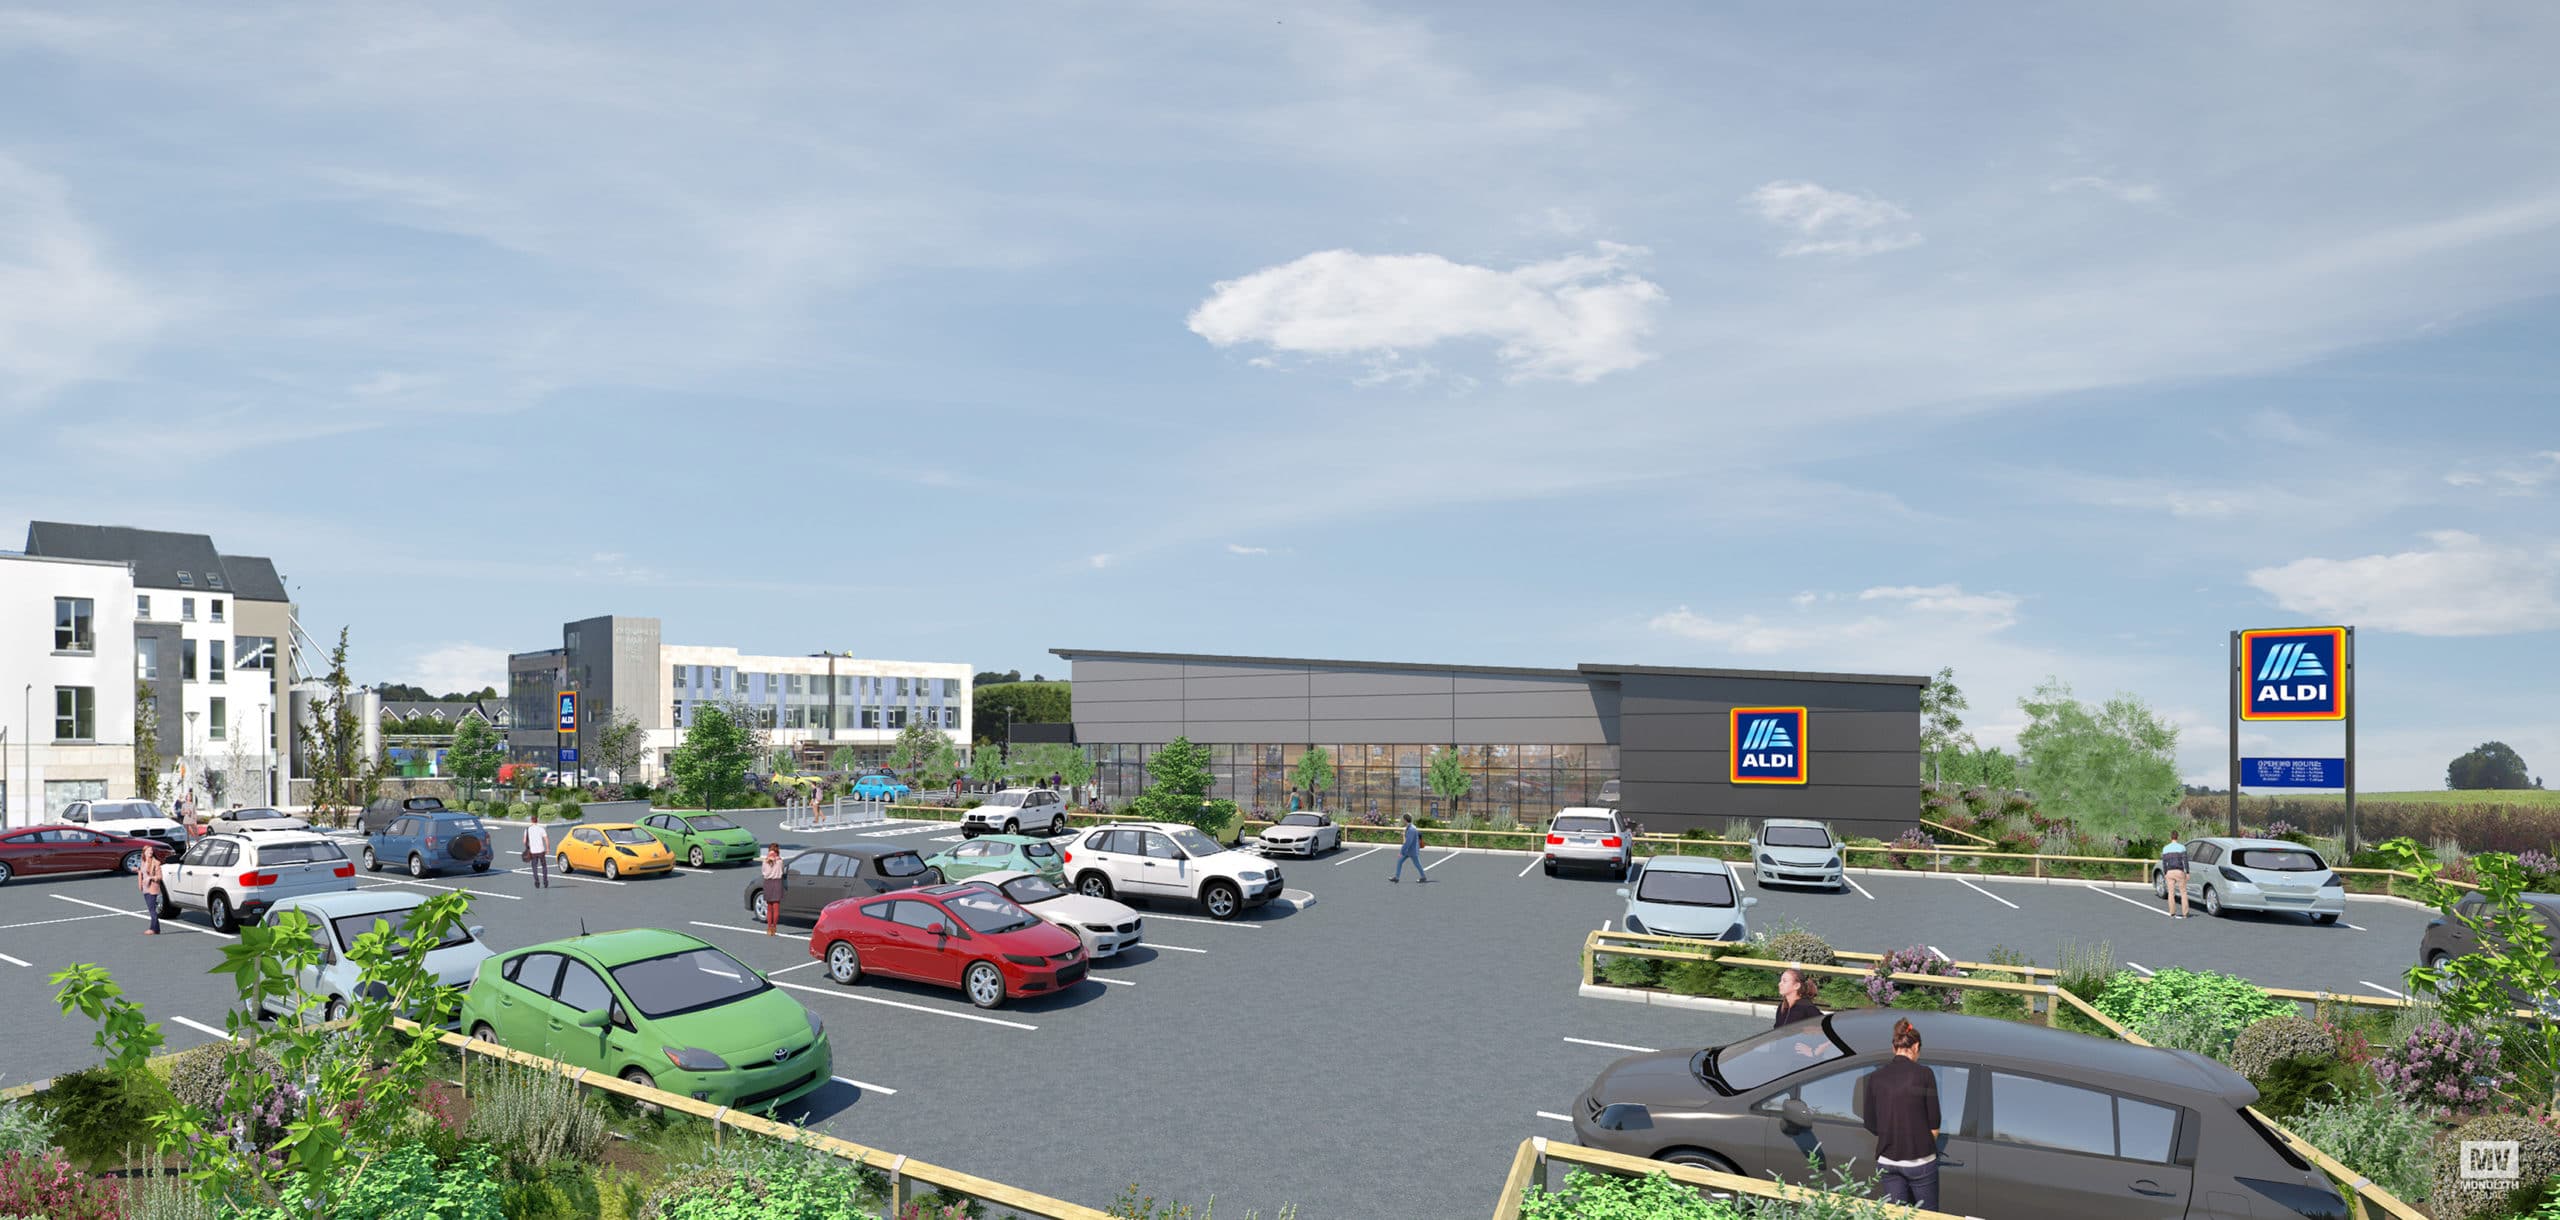 Aldi unveils plans to open new Clonakilty store in 2022